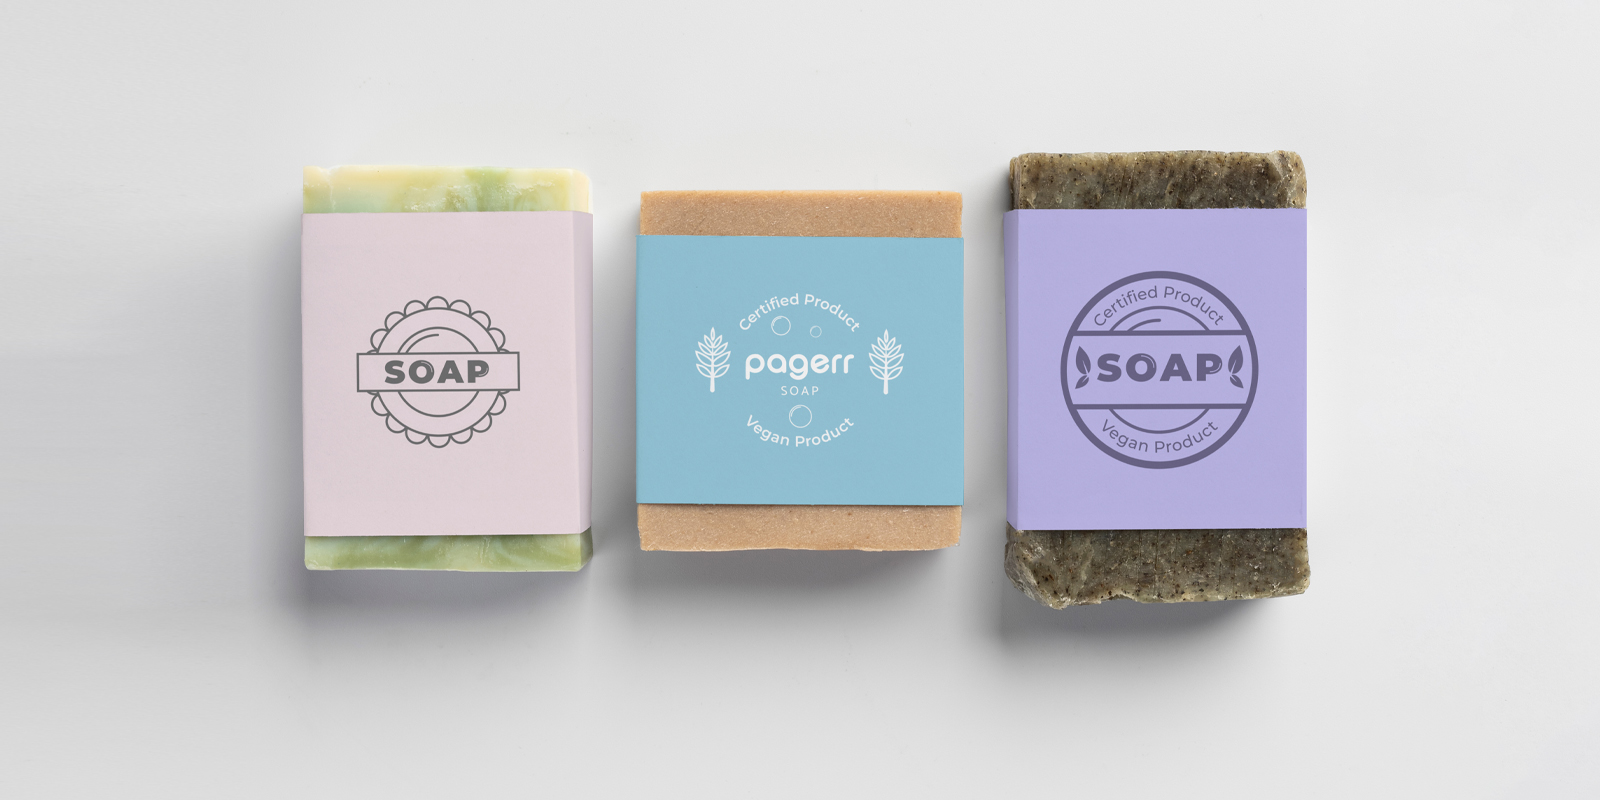 Soap labels in Melbourne - Print with Pagerr